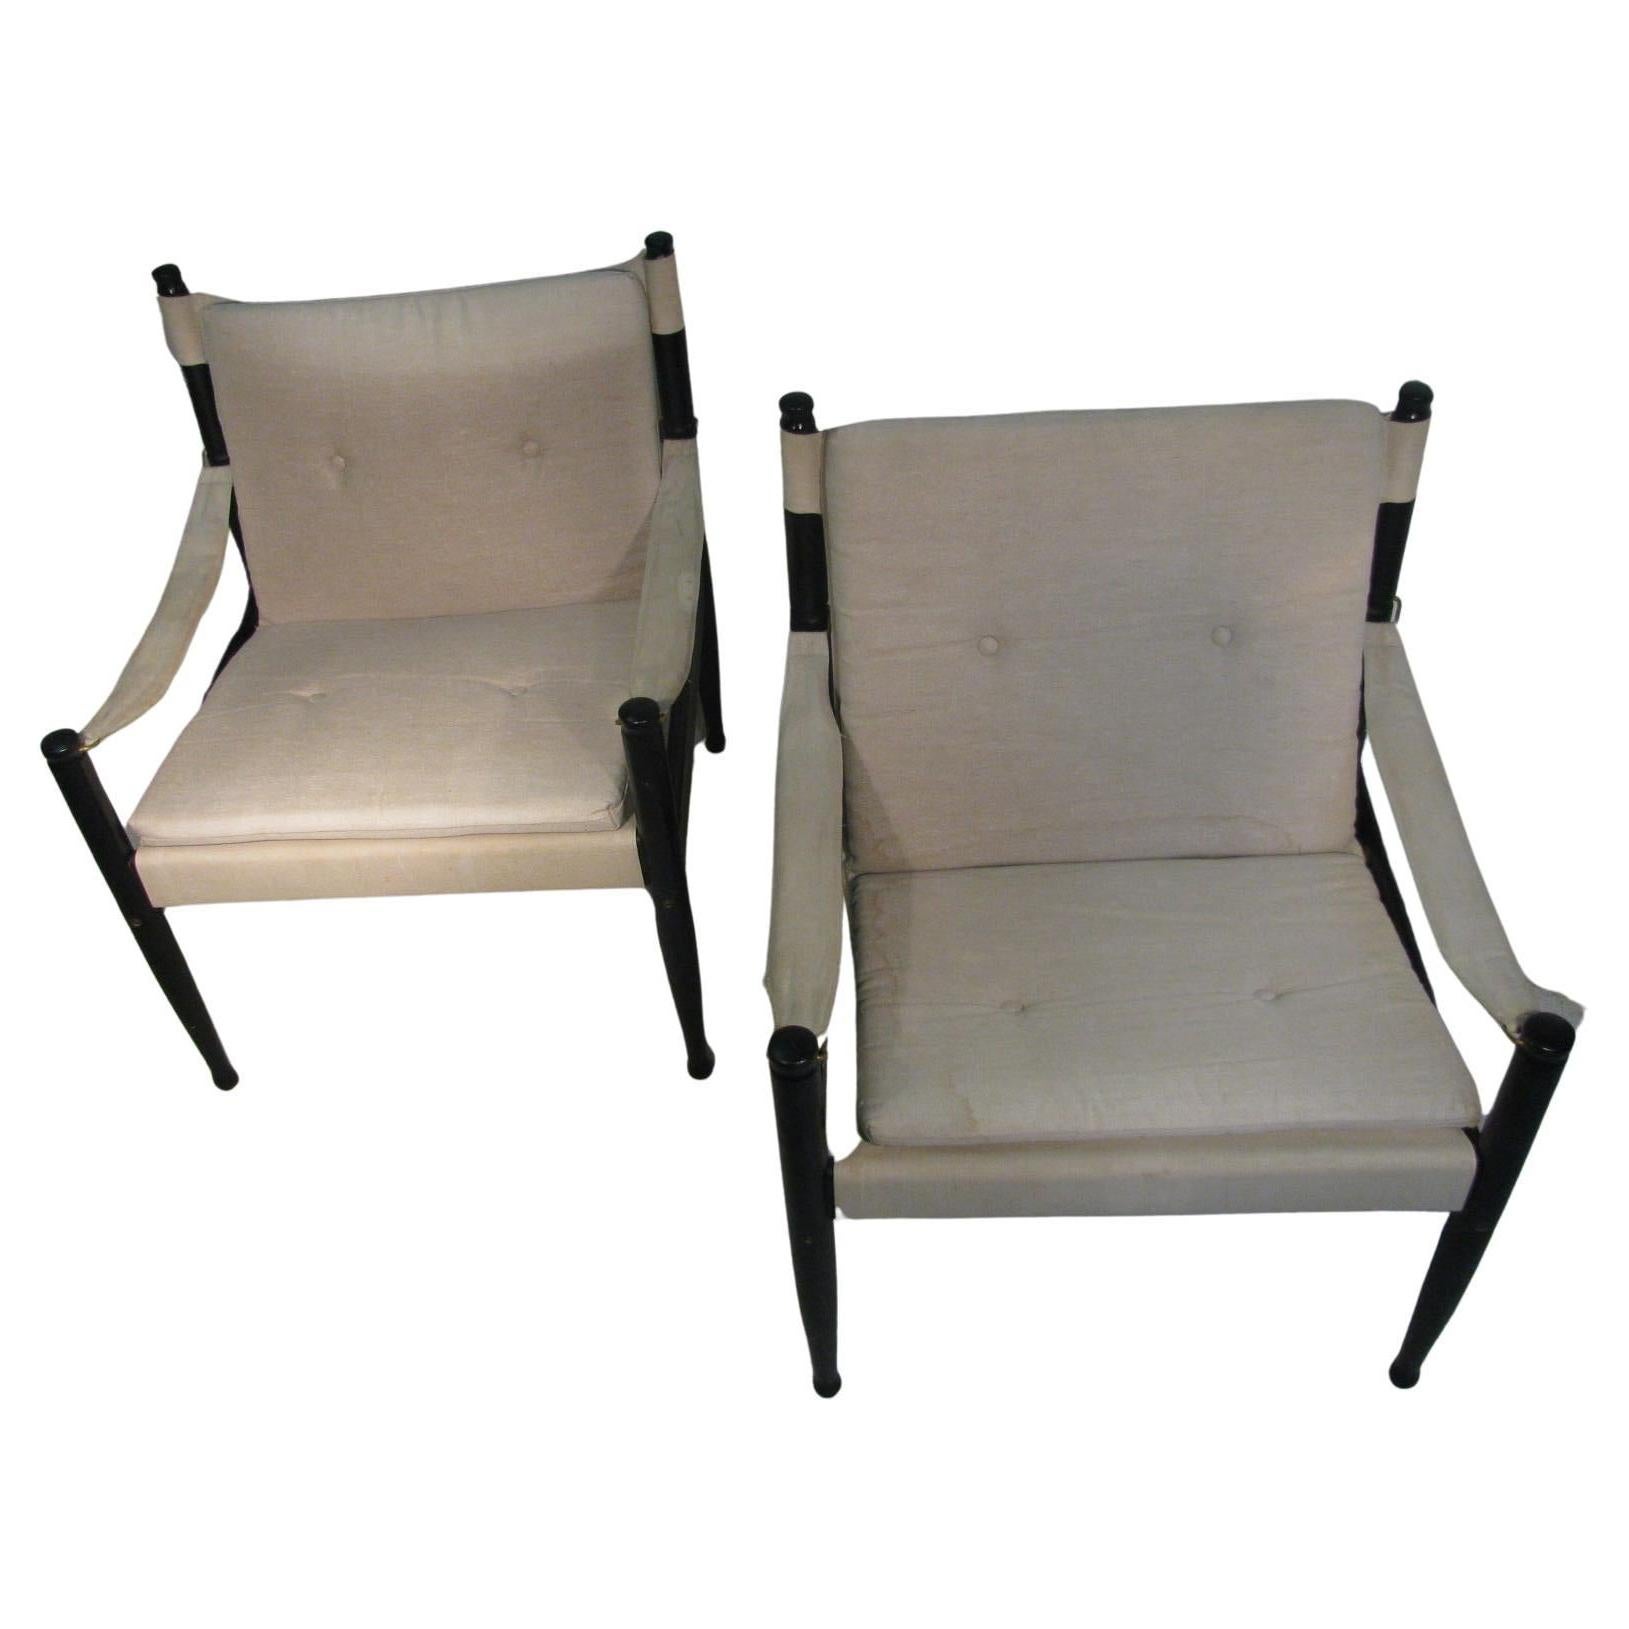 Pair of Mid-Century Modern Danish Safari Campaign Lounge Chairs by Erik Worts For Sale